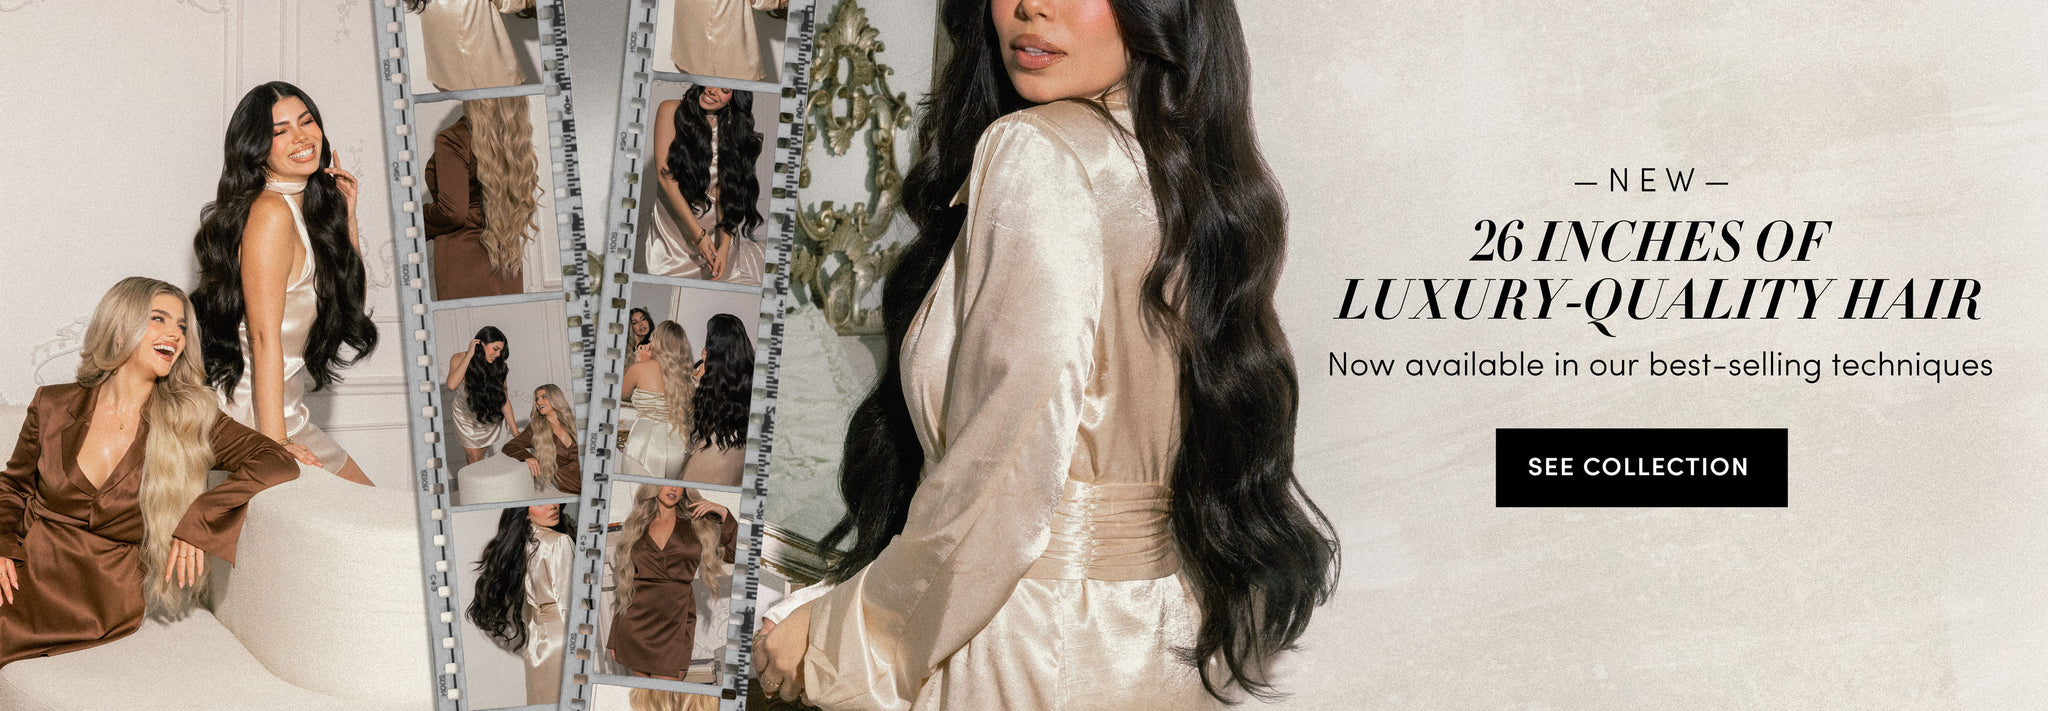 New! 26 inches of luxury-quality hair | Now available in our best-selling techniques | SEE COLLECTION